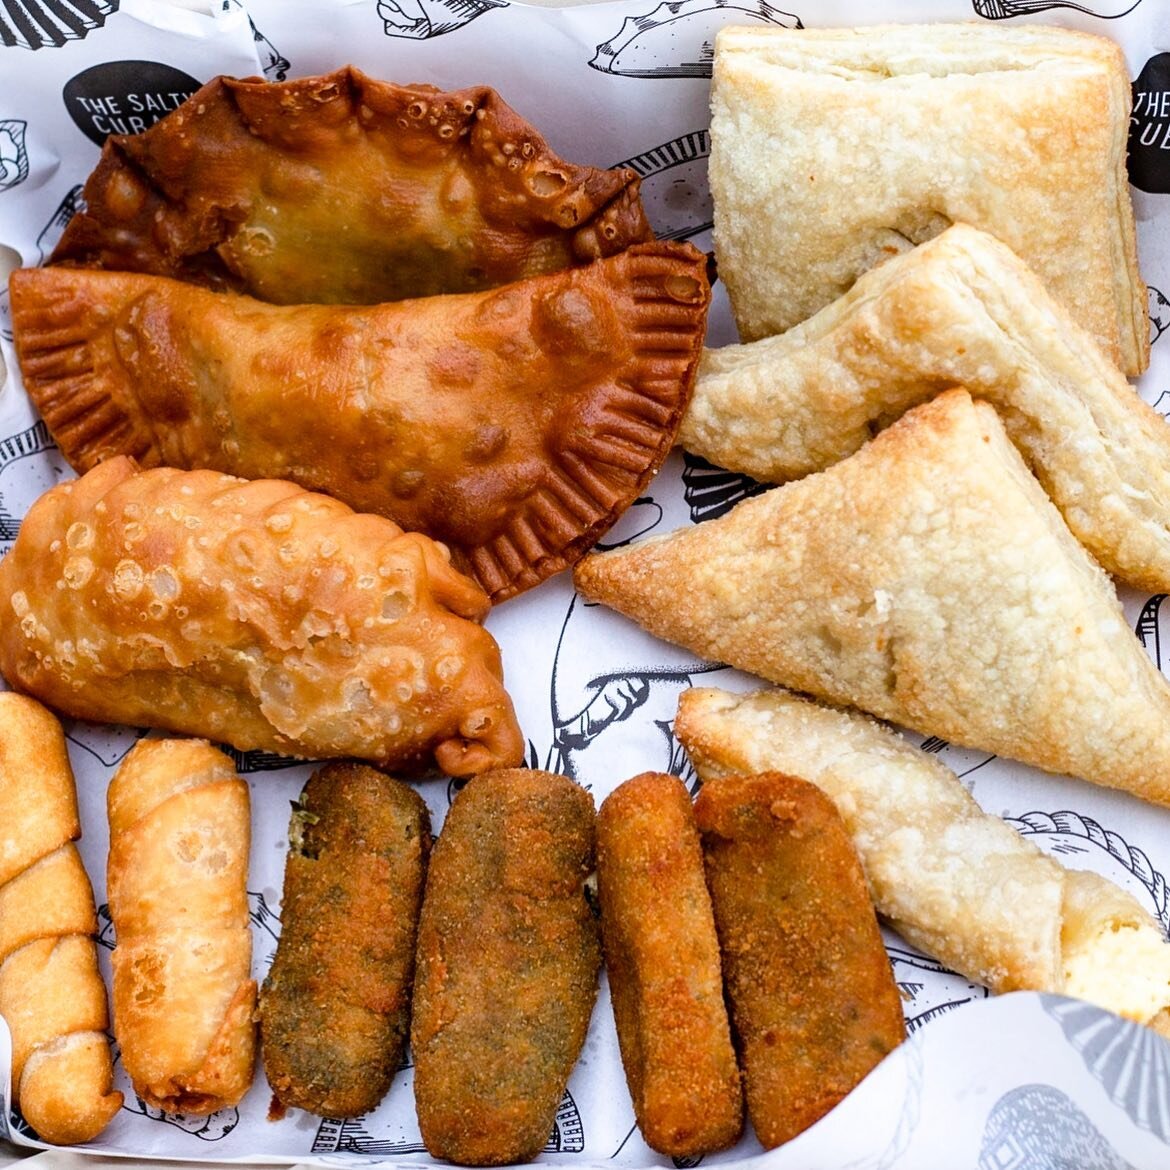 Allow us to put y&rsquo;all on to @thesaltycubana 🇨🇺🏝
Look no further for authentic Cuban / Miami inspired bites! When we tell you this sampler box was gone in a flash it&rsquo;s no exaggeration: the empanadas, pastelitos, teque&ntilde;os and croq